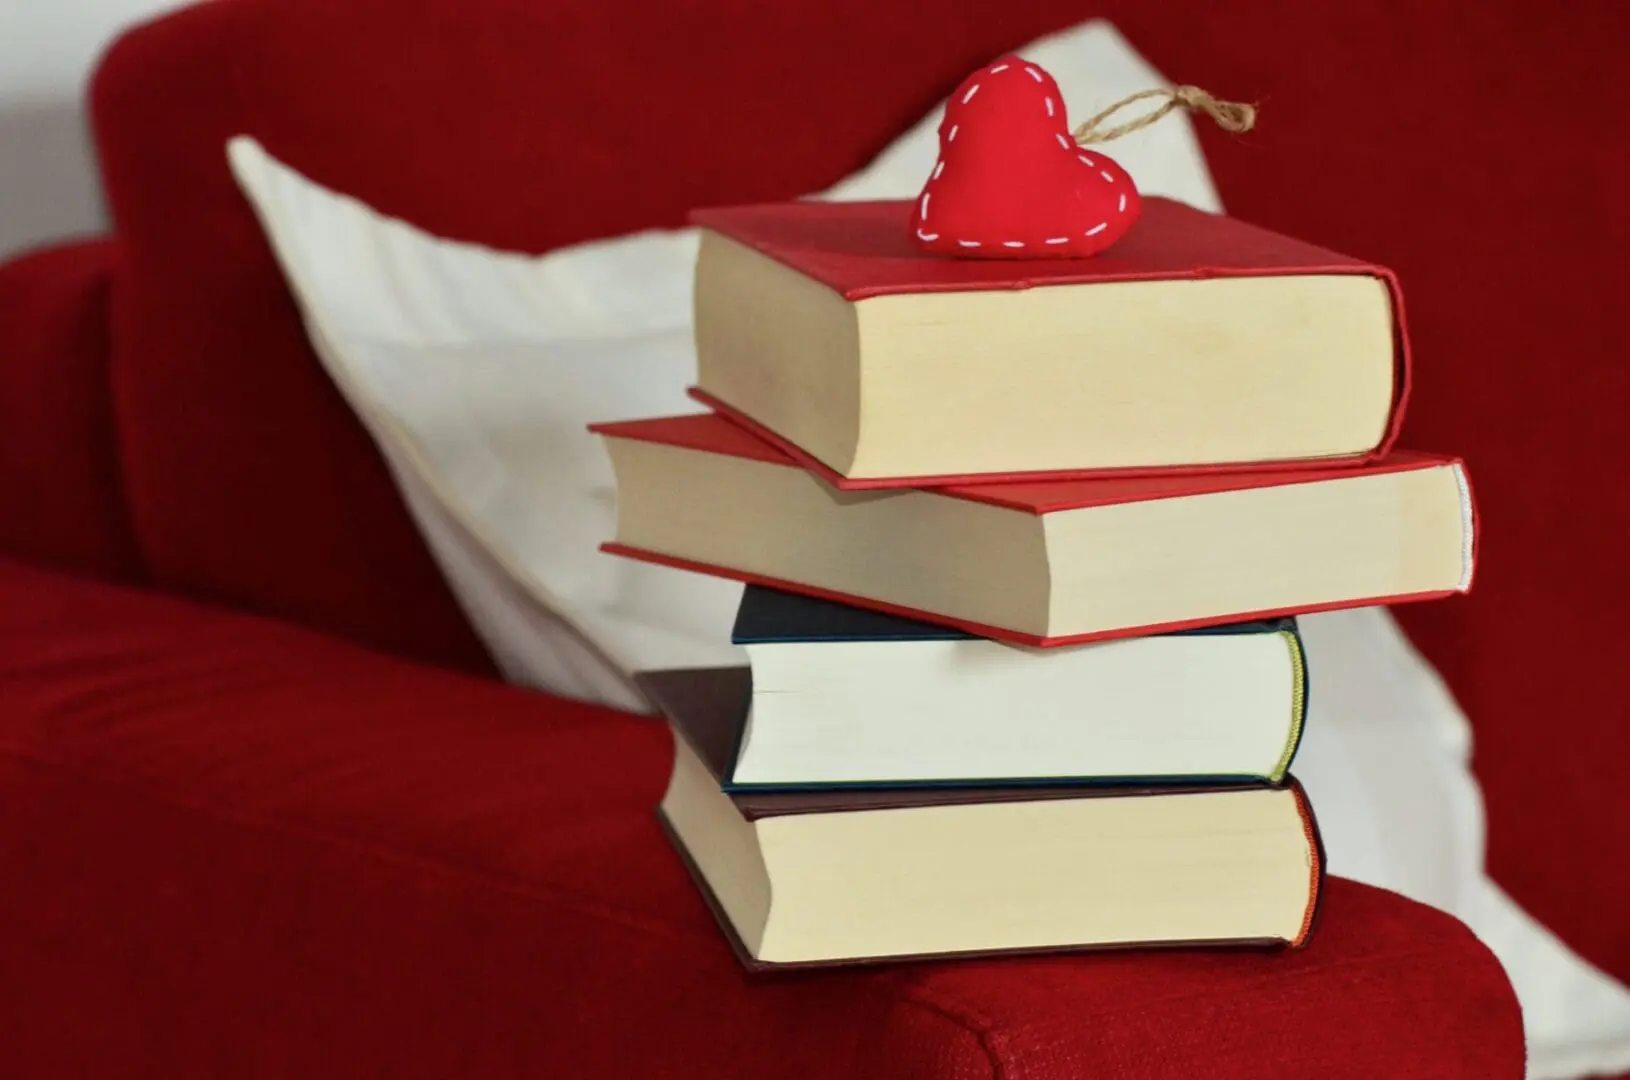 A bunch of books kept on a red couch with a heart on top of books